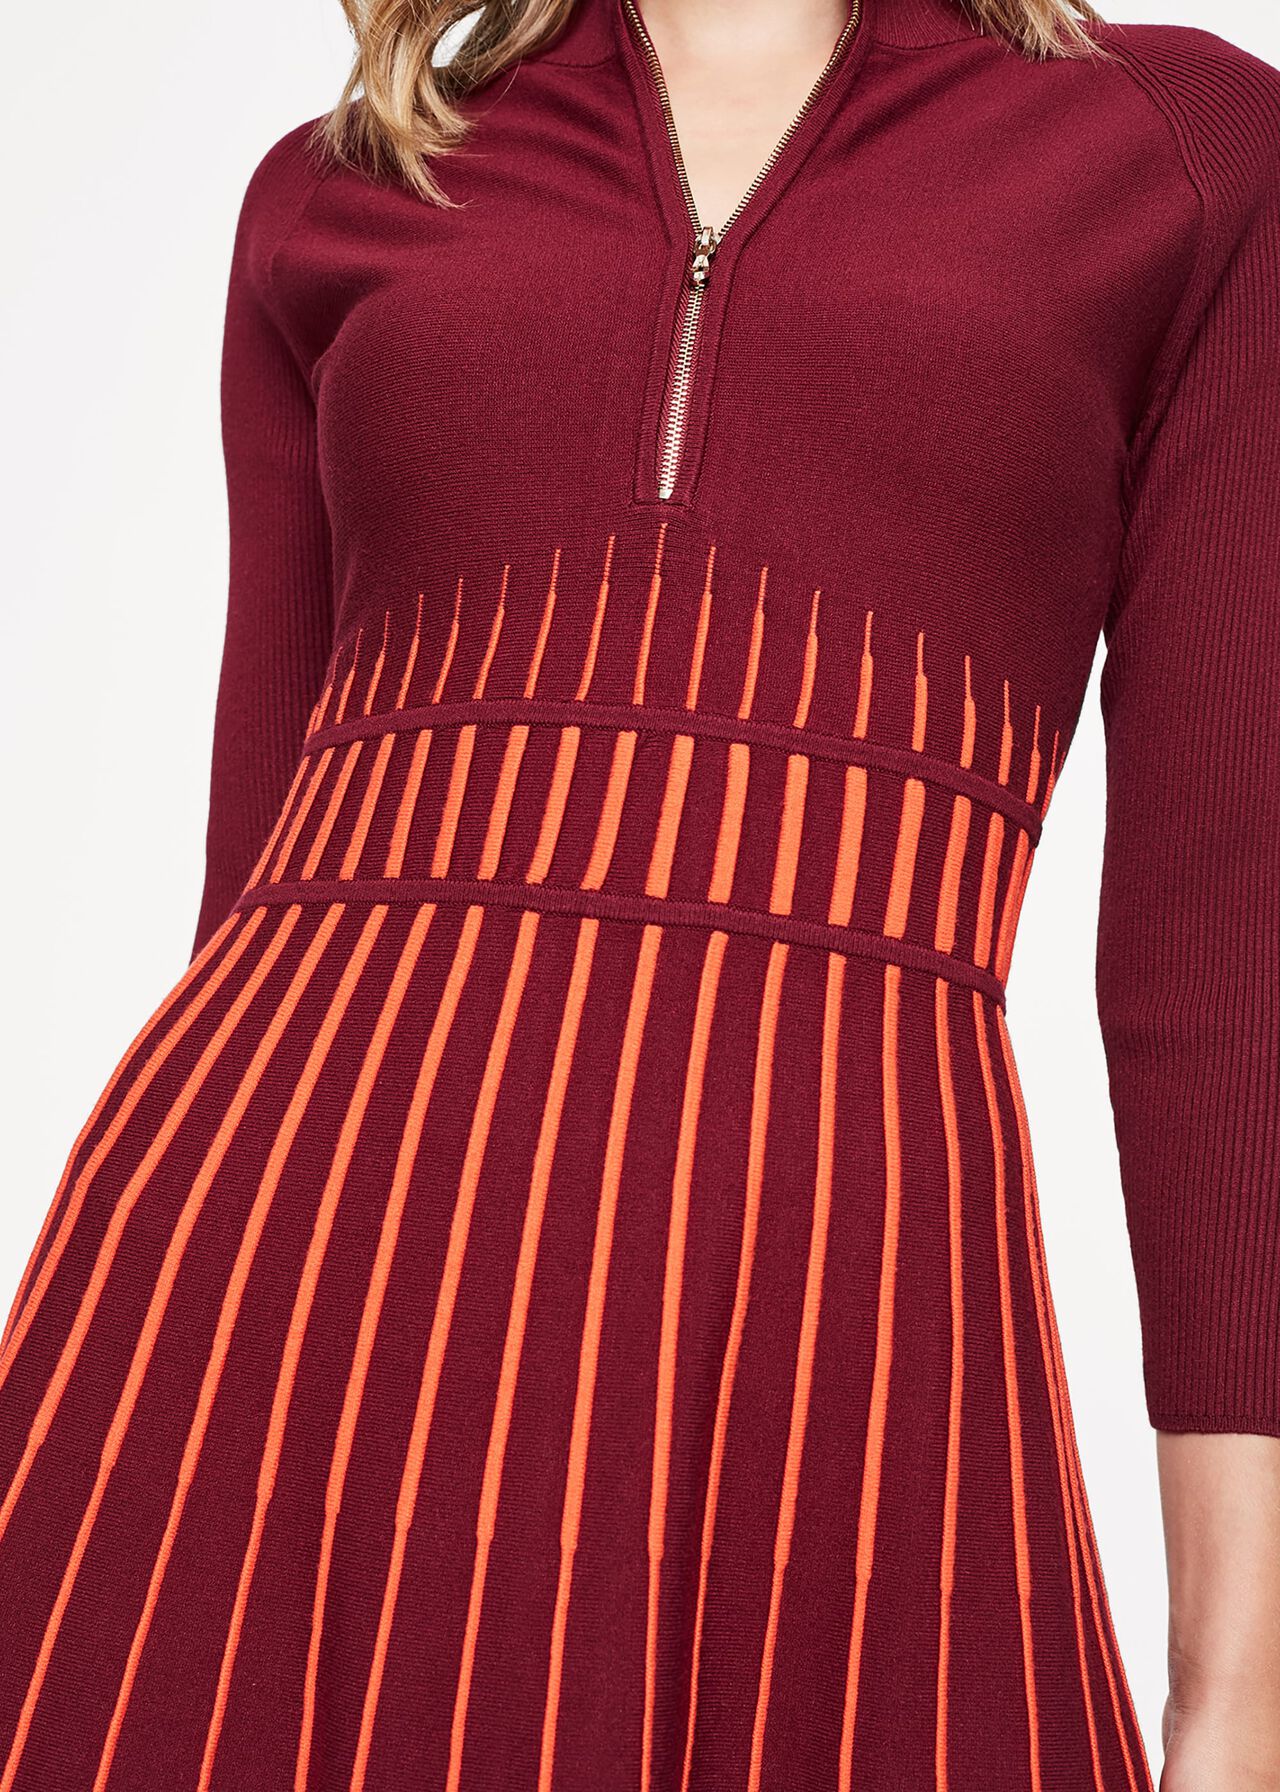 Adela Striped Knitted Tunic Dress